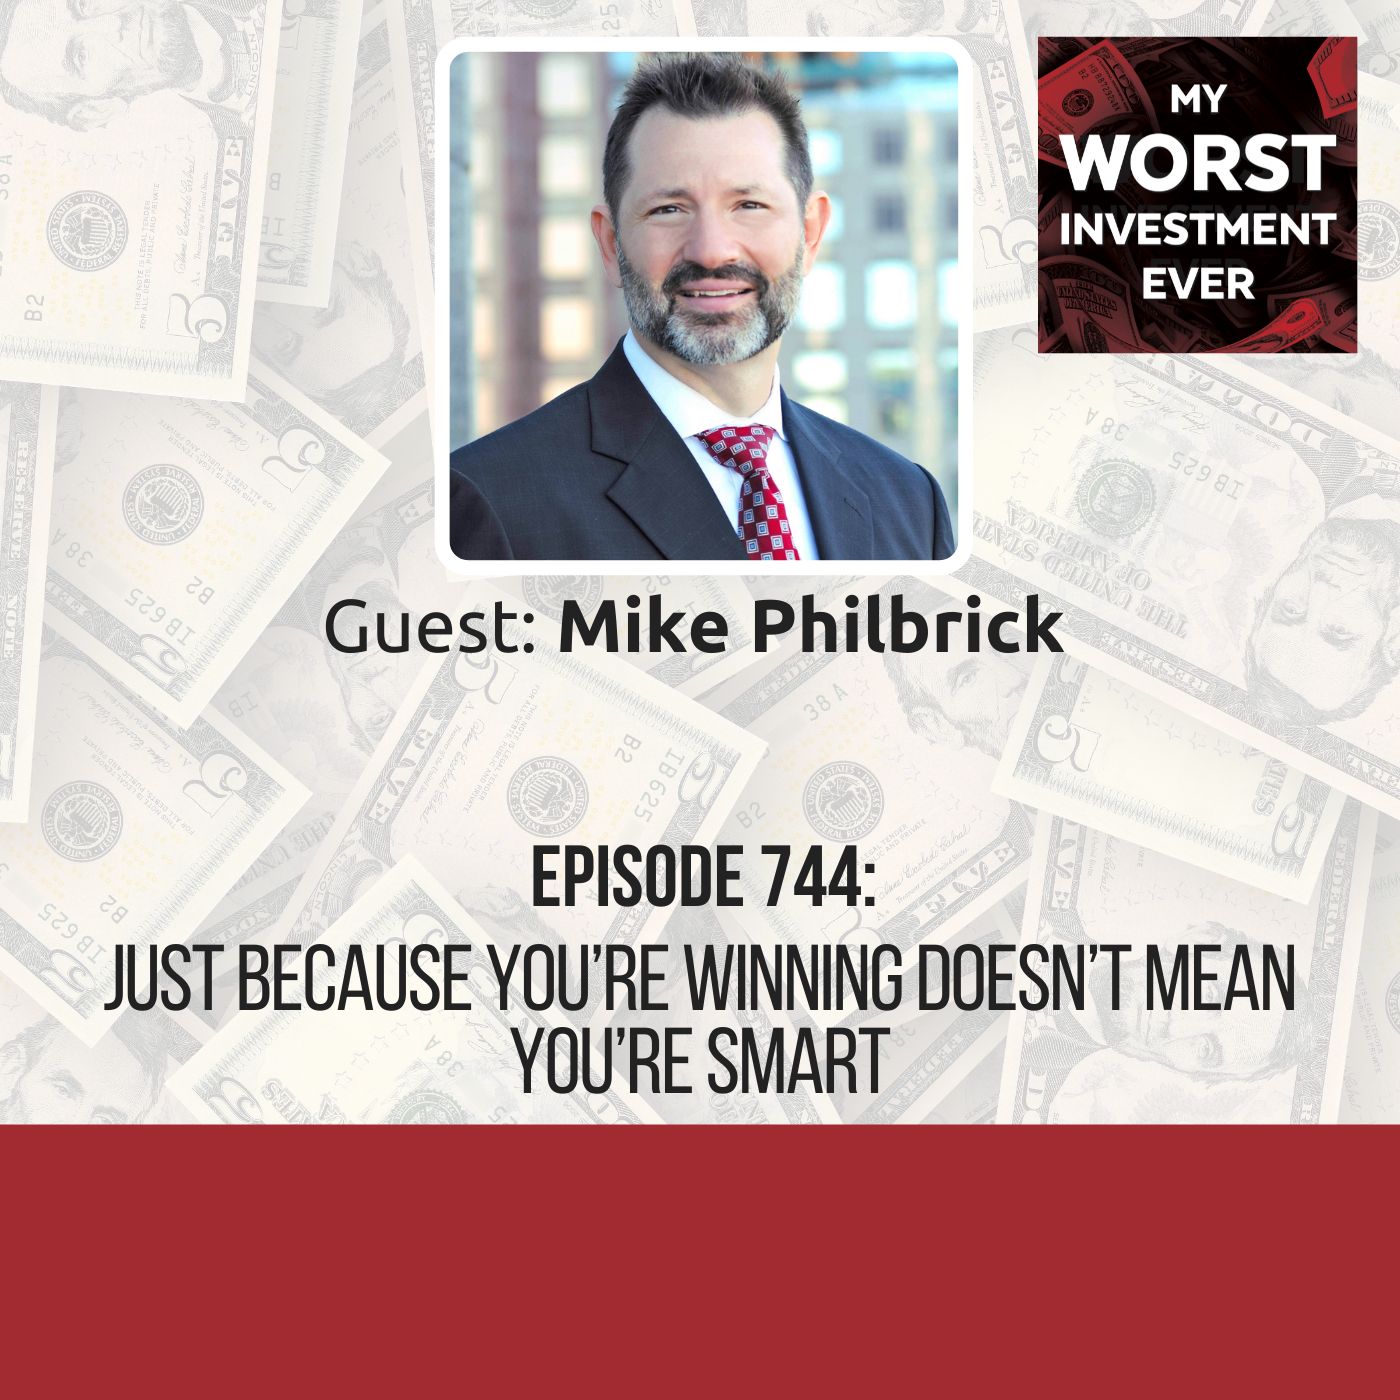 Mike Philbrick – Just Because You’re Winning Doesn’t Mean You’re Smart